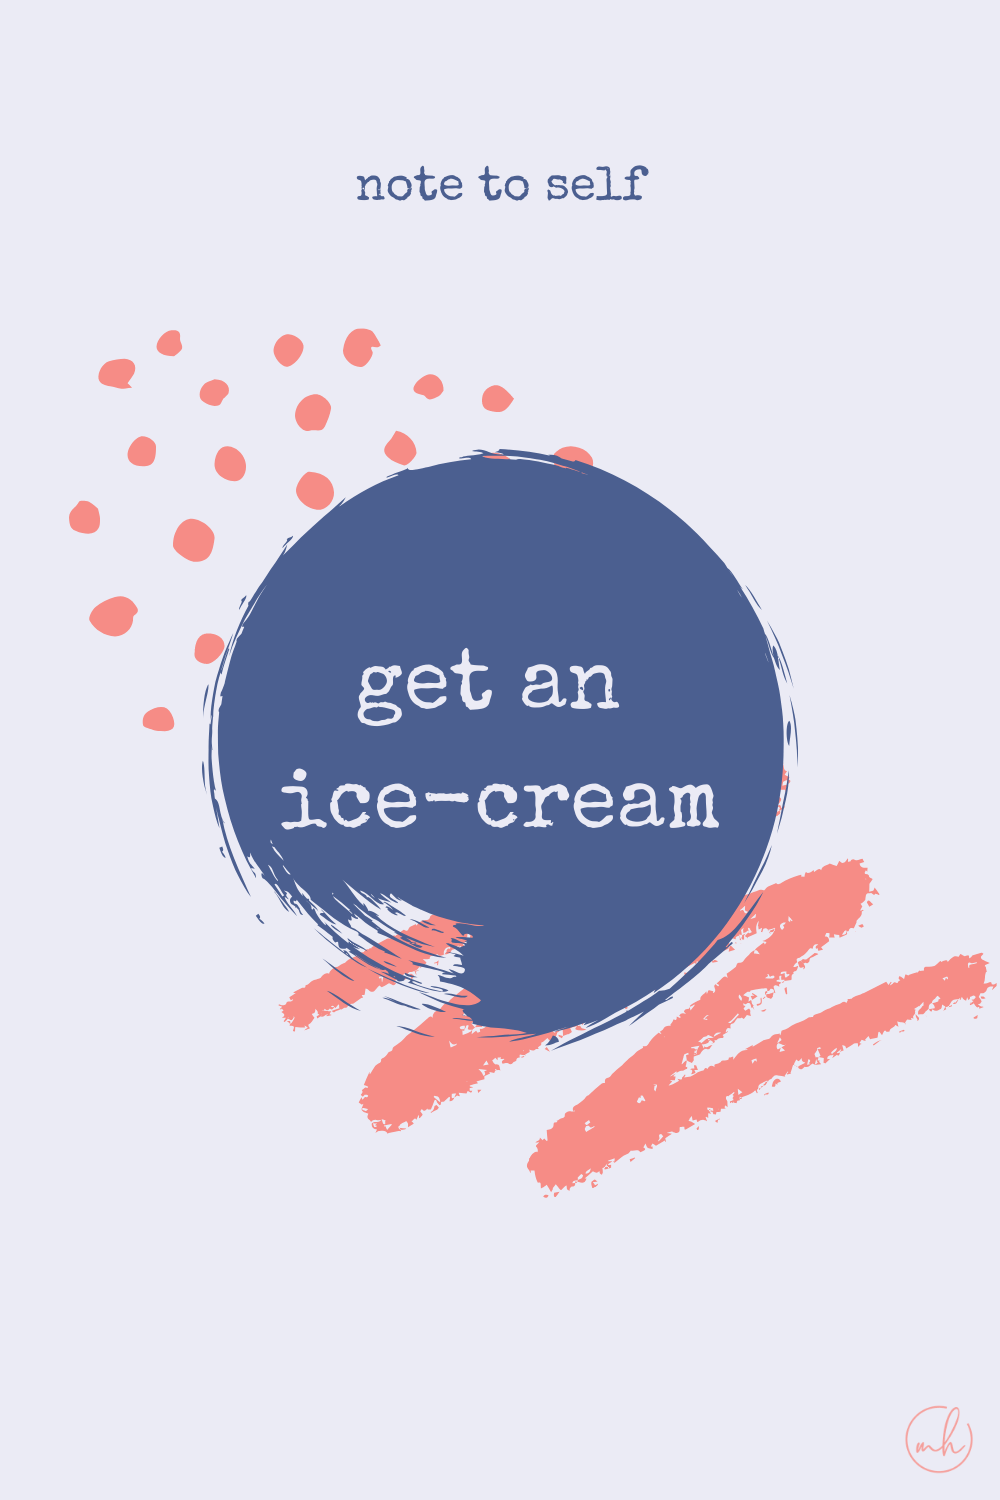 Get an ice-cream - Note to self quotes | myhoogah